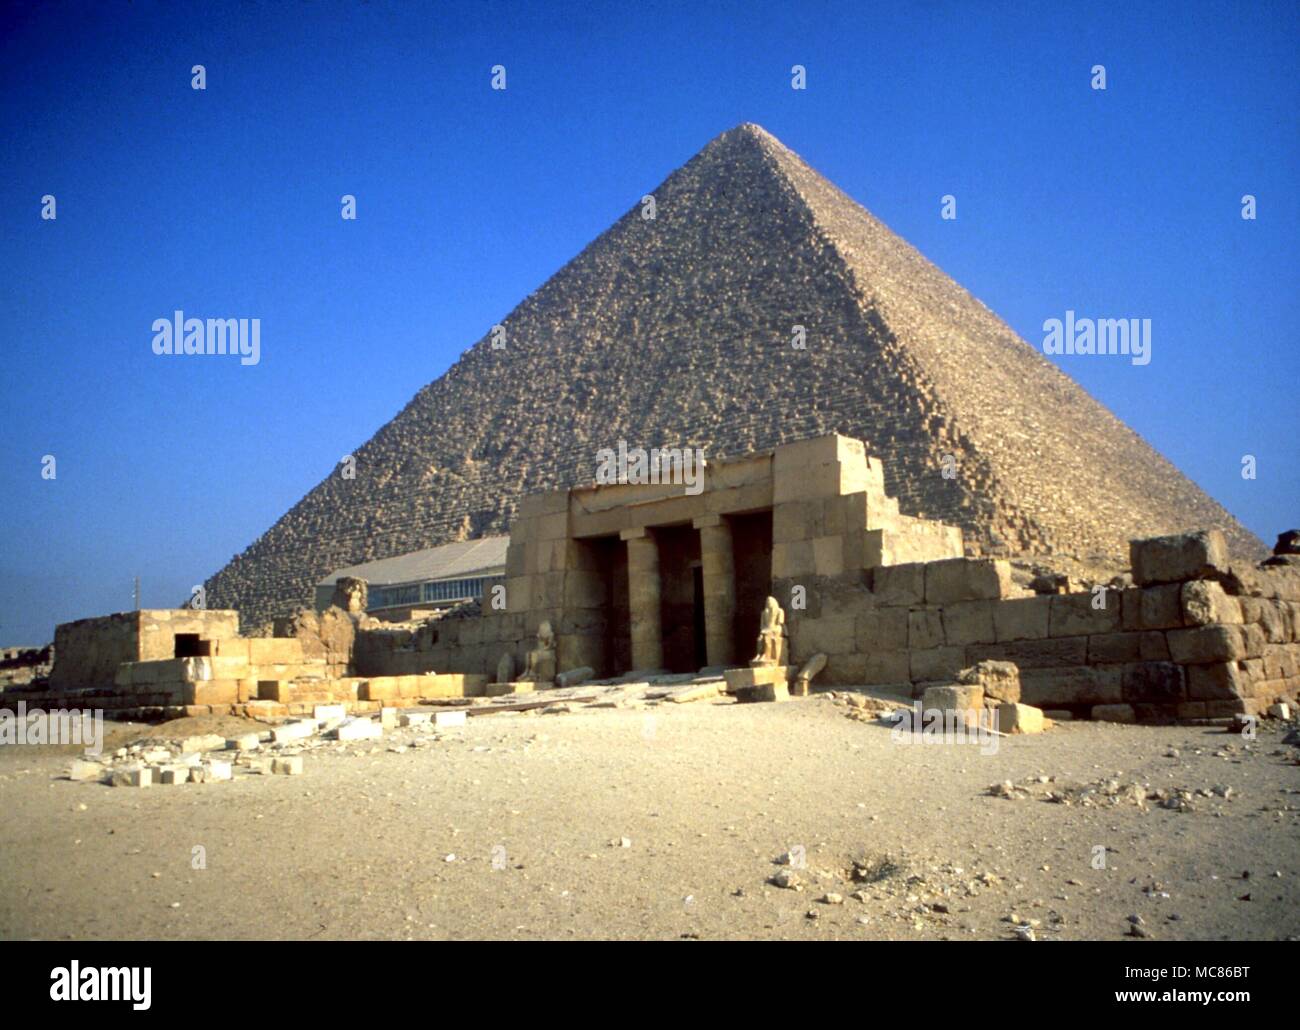 View of Cheop's pyramid at Gizah, Egypt Stock Photo